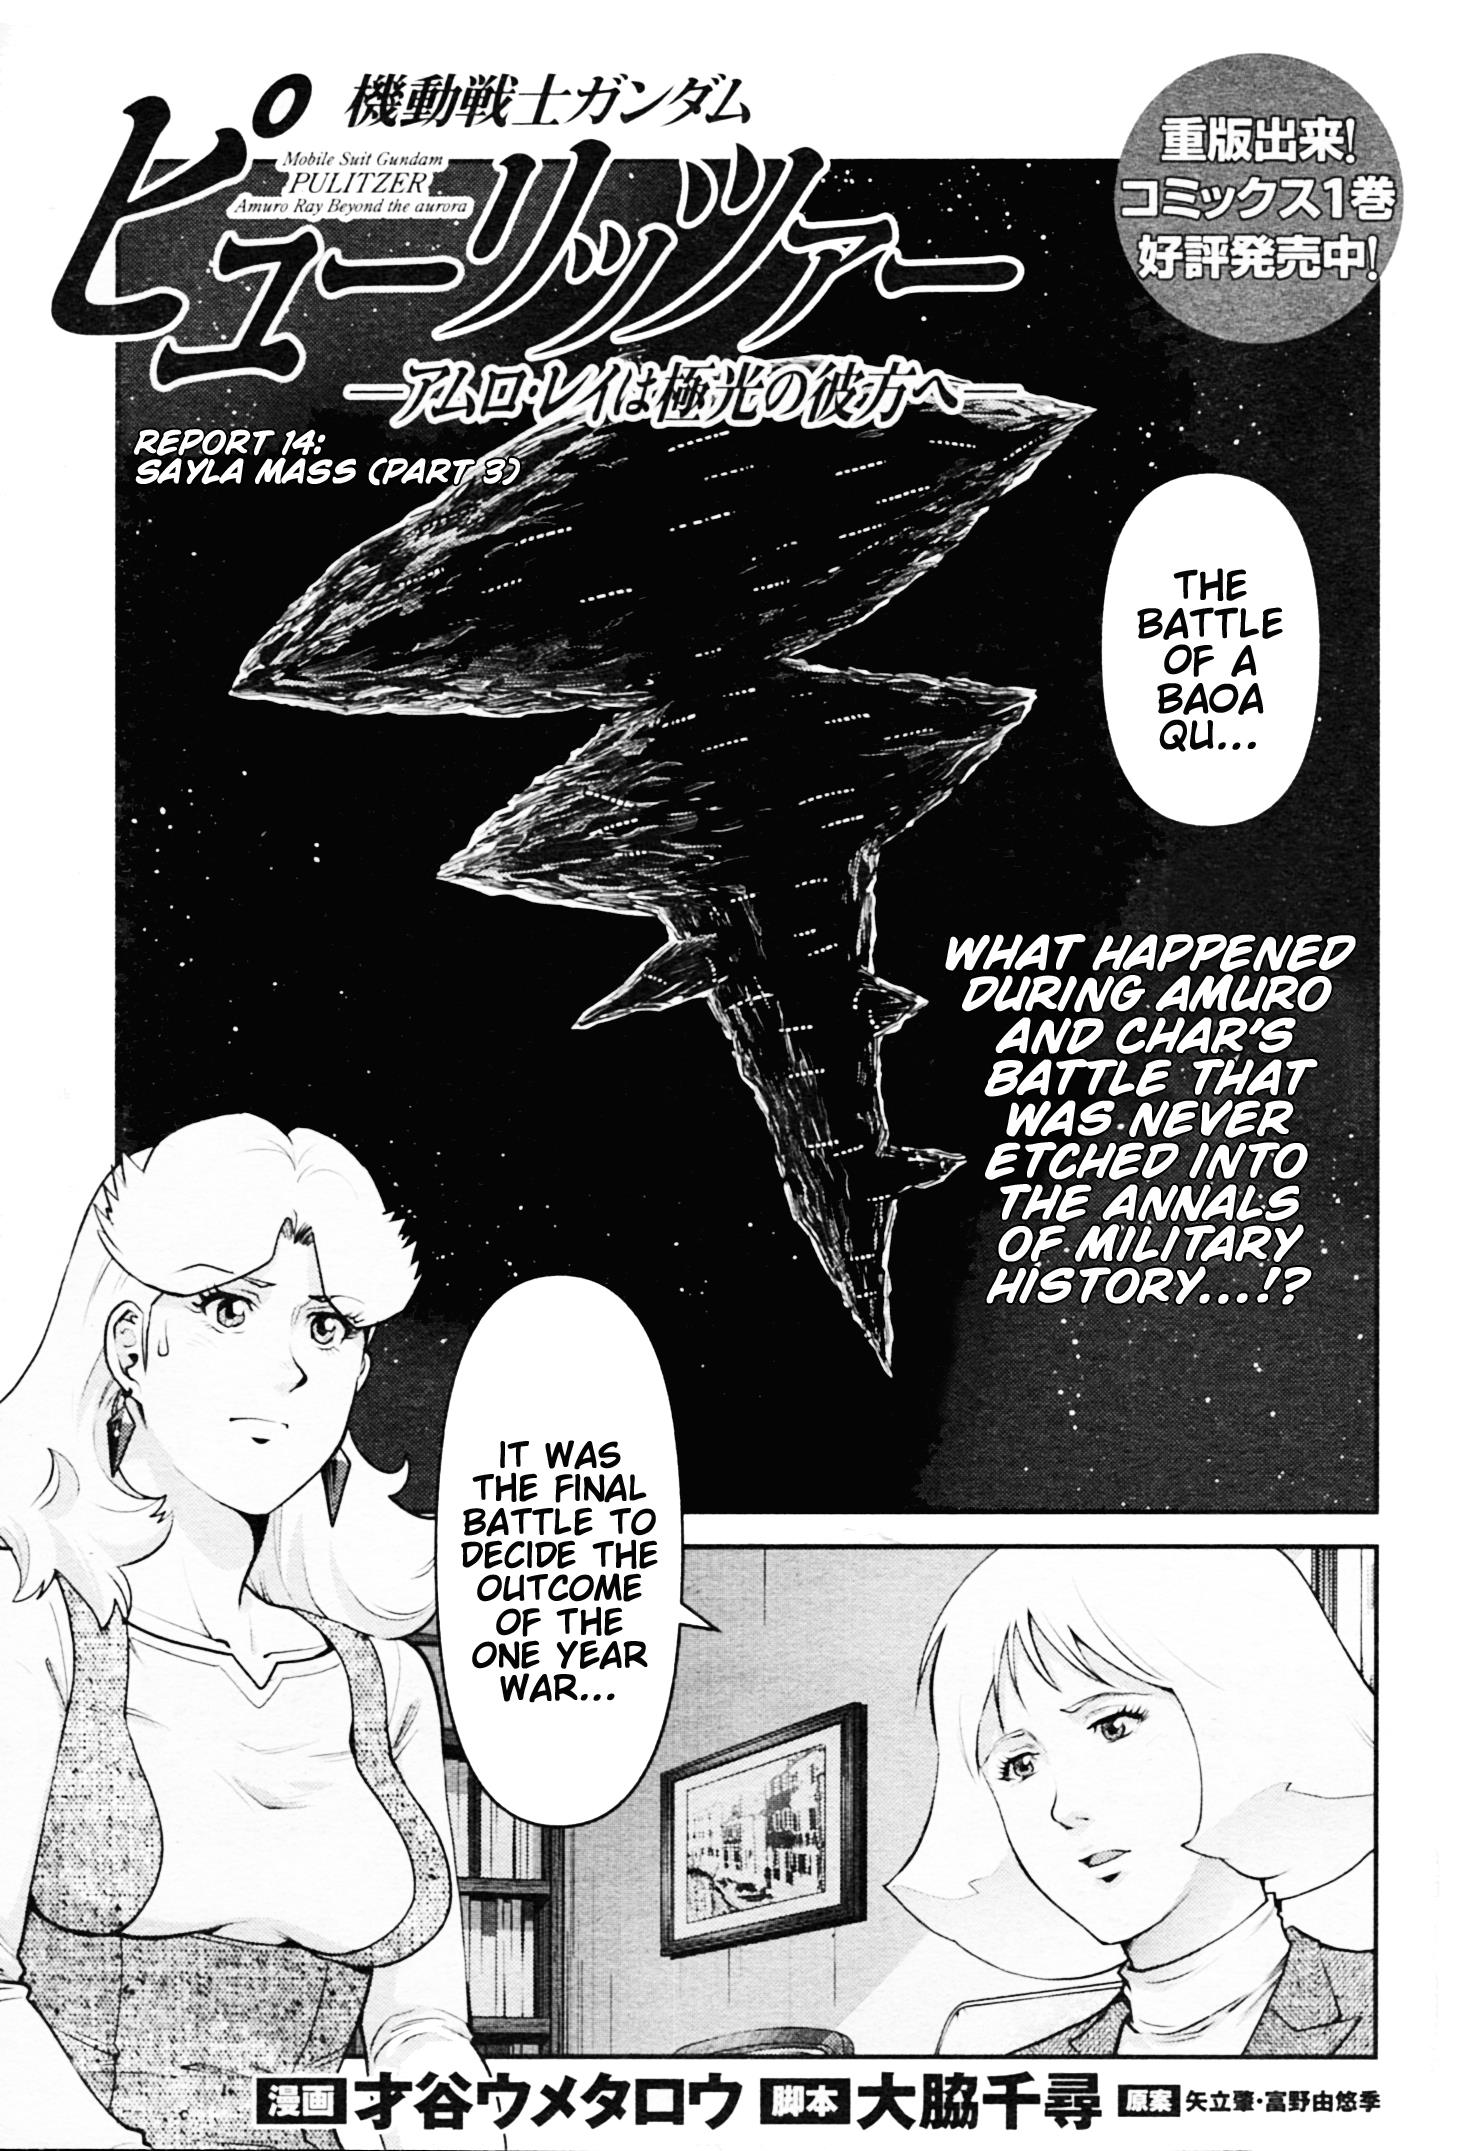 Mobile Suit Gundam Pulitzer - Amuro Ray Beyond The Aurora Vol.2 Chapter 14: Report 14: Sayla Mass (Part 3) - Picture 1